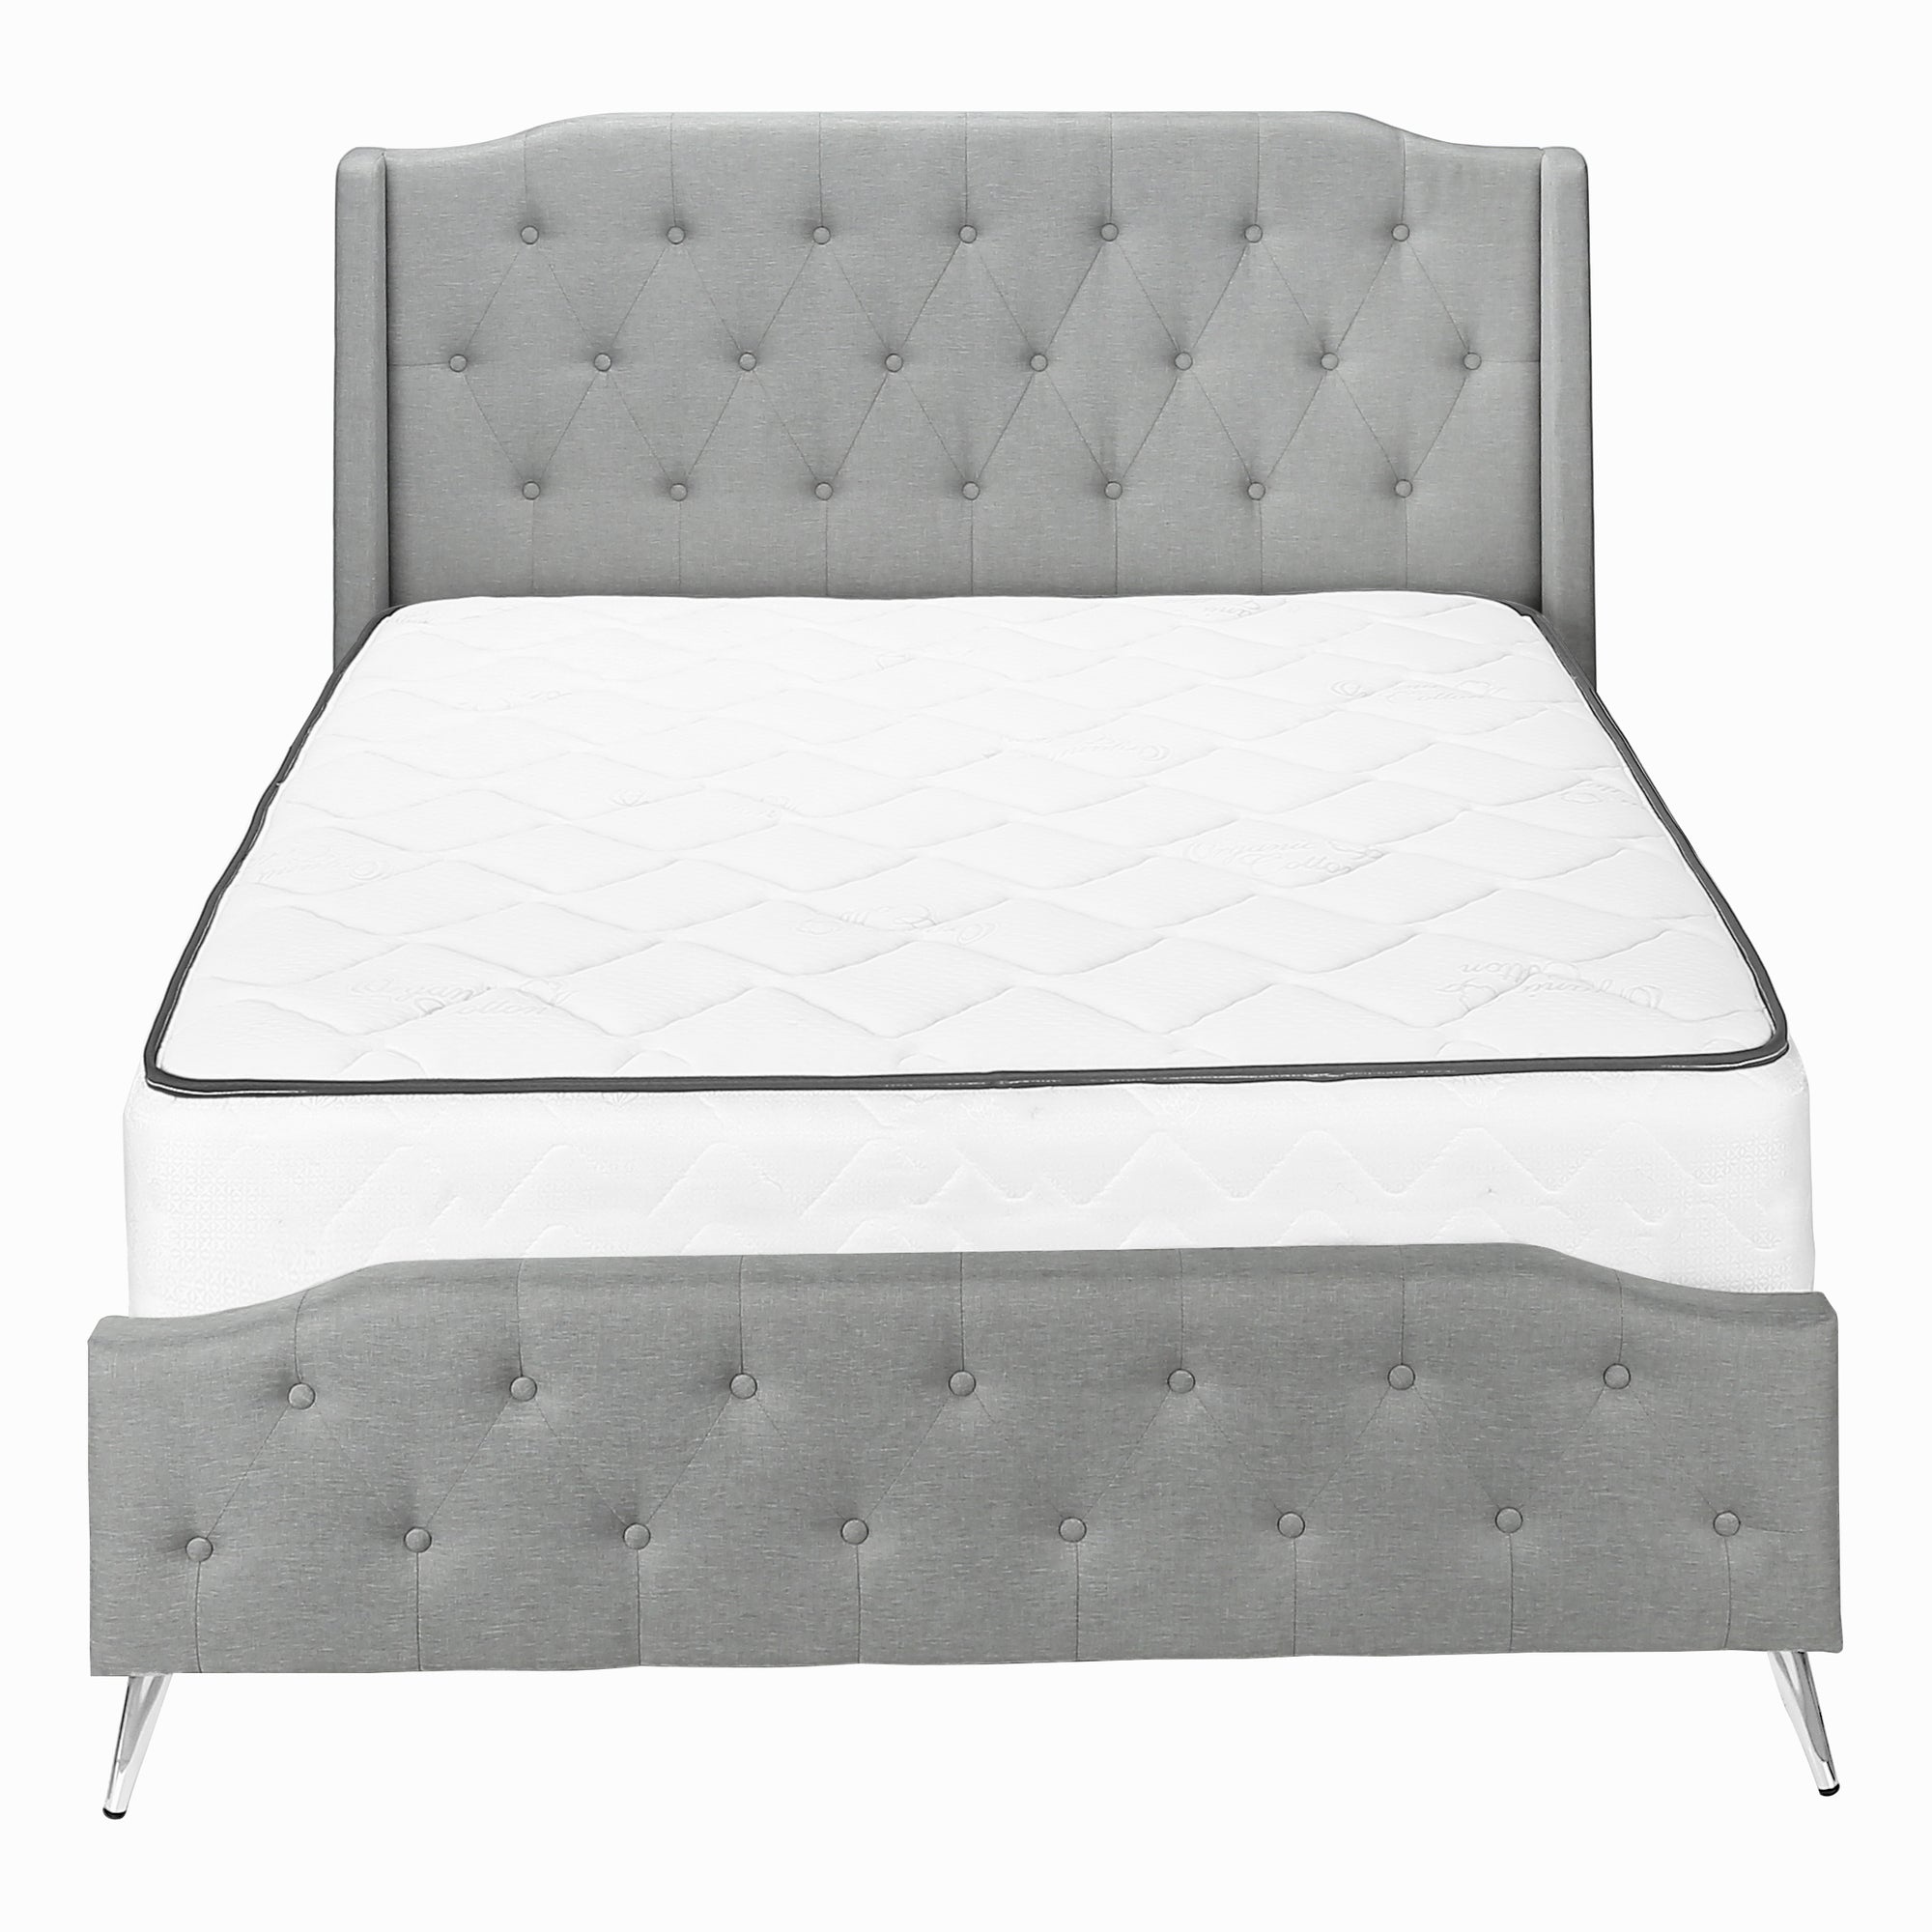 BED - QUEEN SIZE / GREY LINEN WITH CHROME METAL LEGS